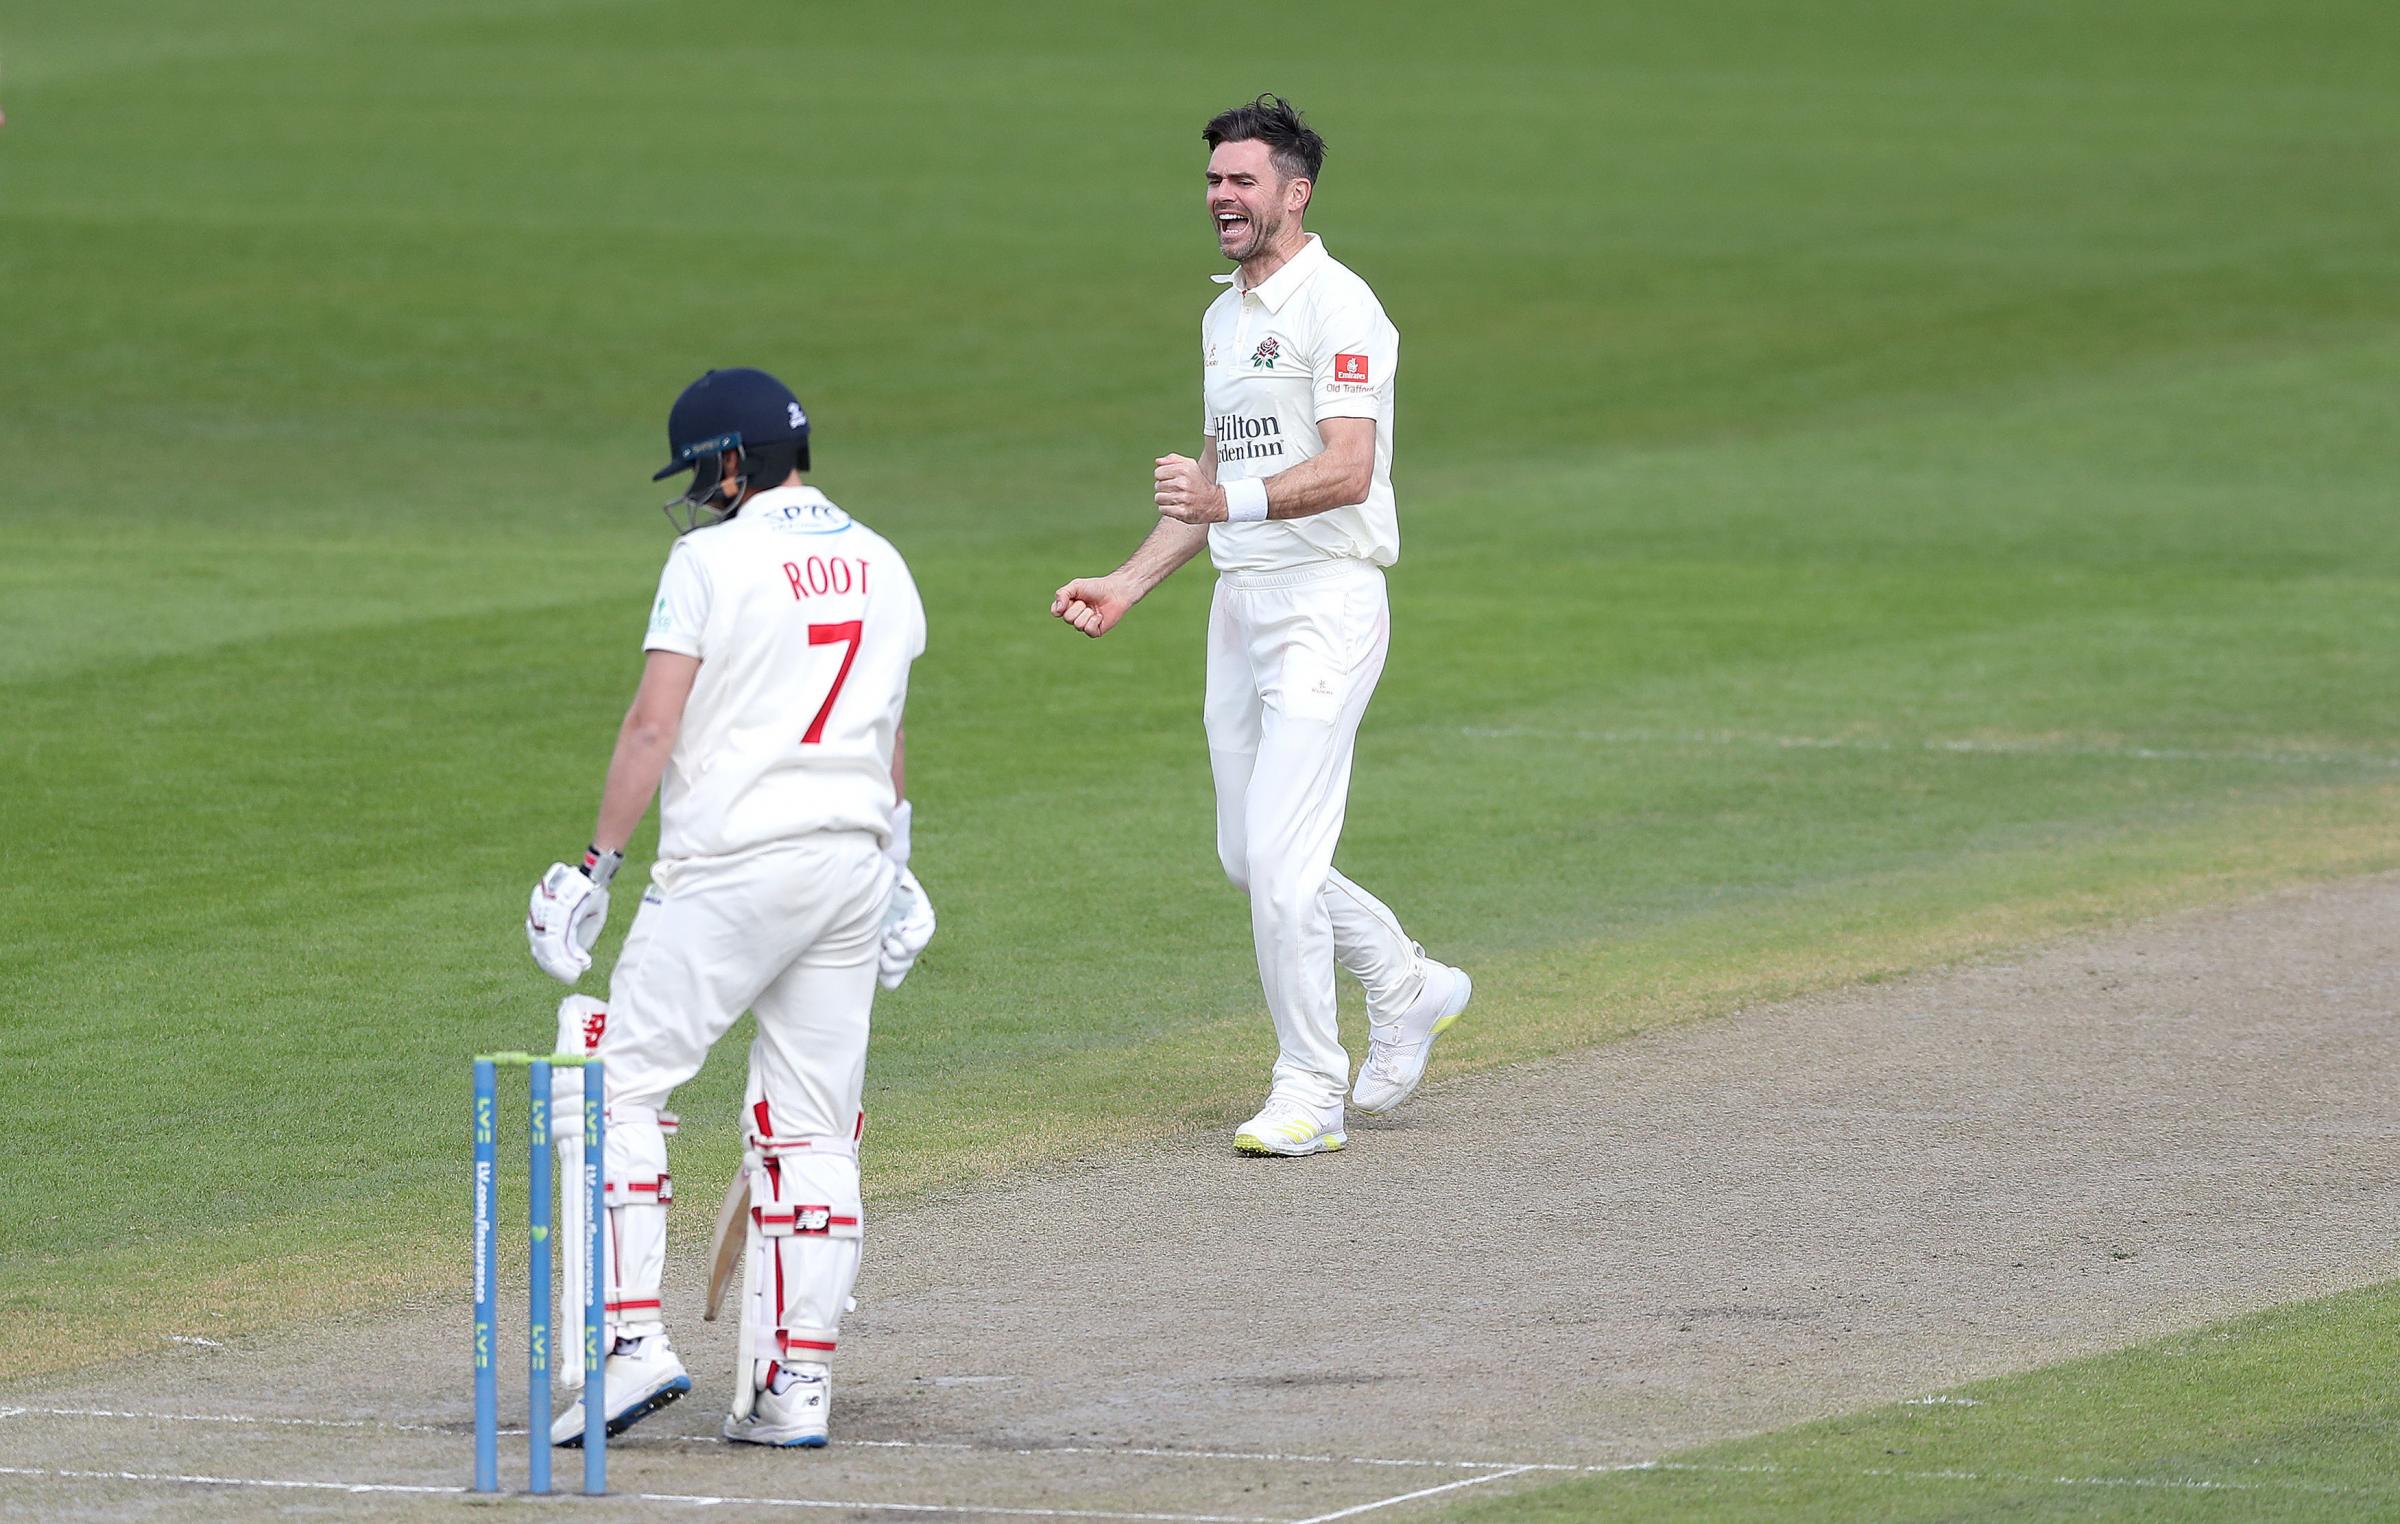 Lancashires James Anderson celebrates taking the wicket of Glamorgans Billy Root, during day two of the LV = Insurance County Championship match at the Emirates Old Trafford, Manchester. 